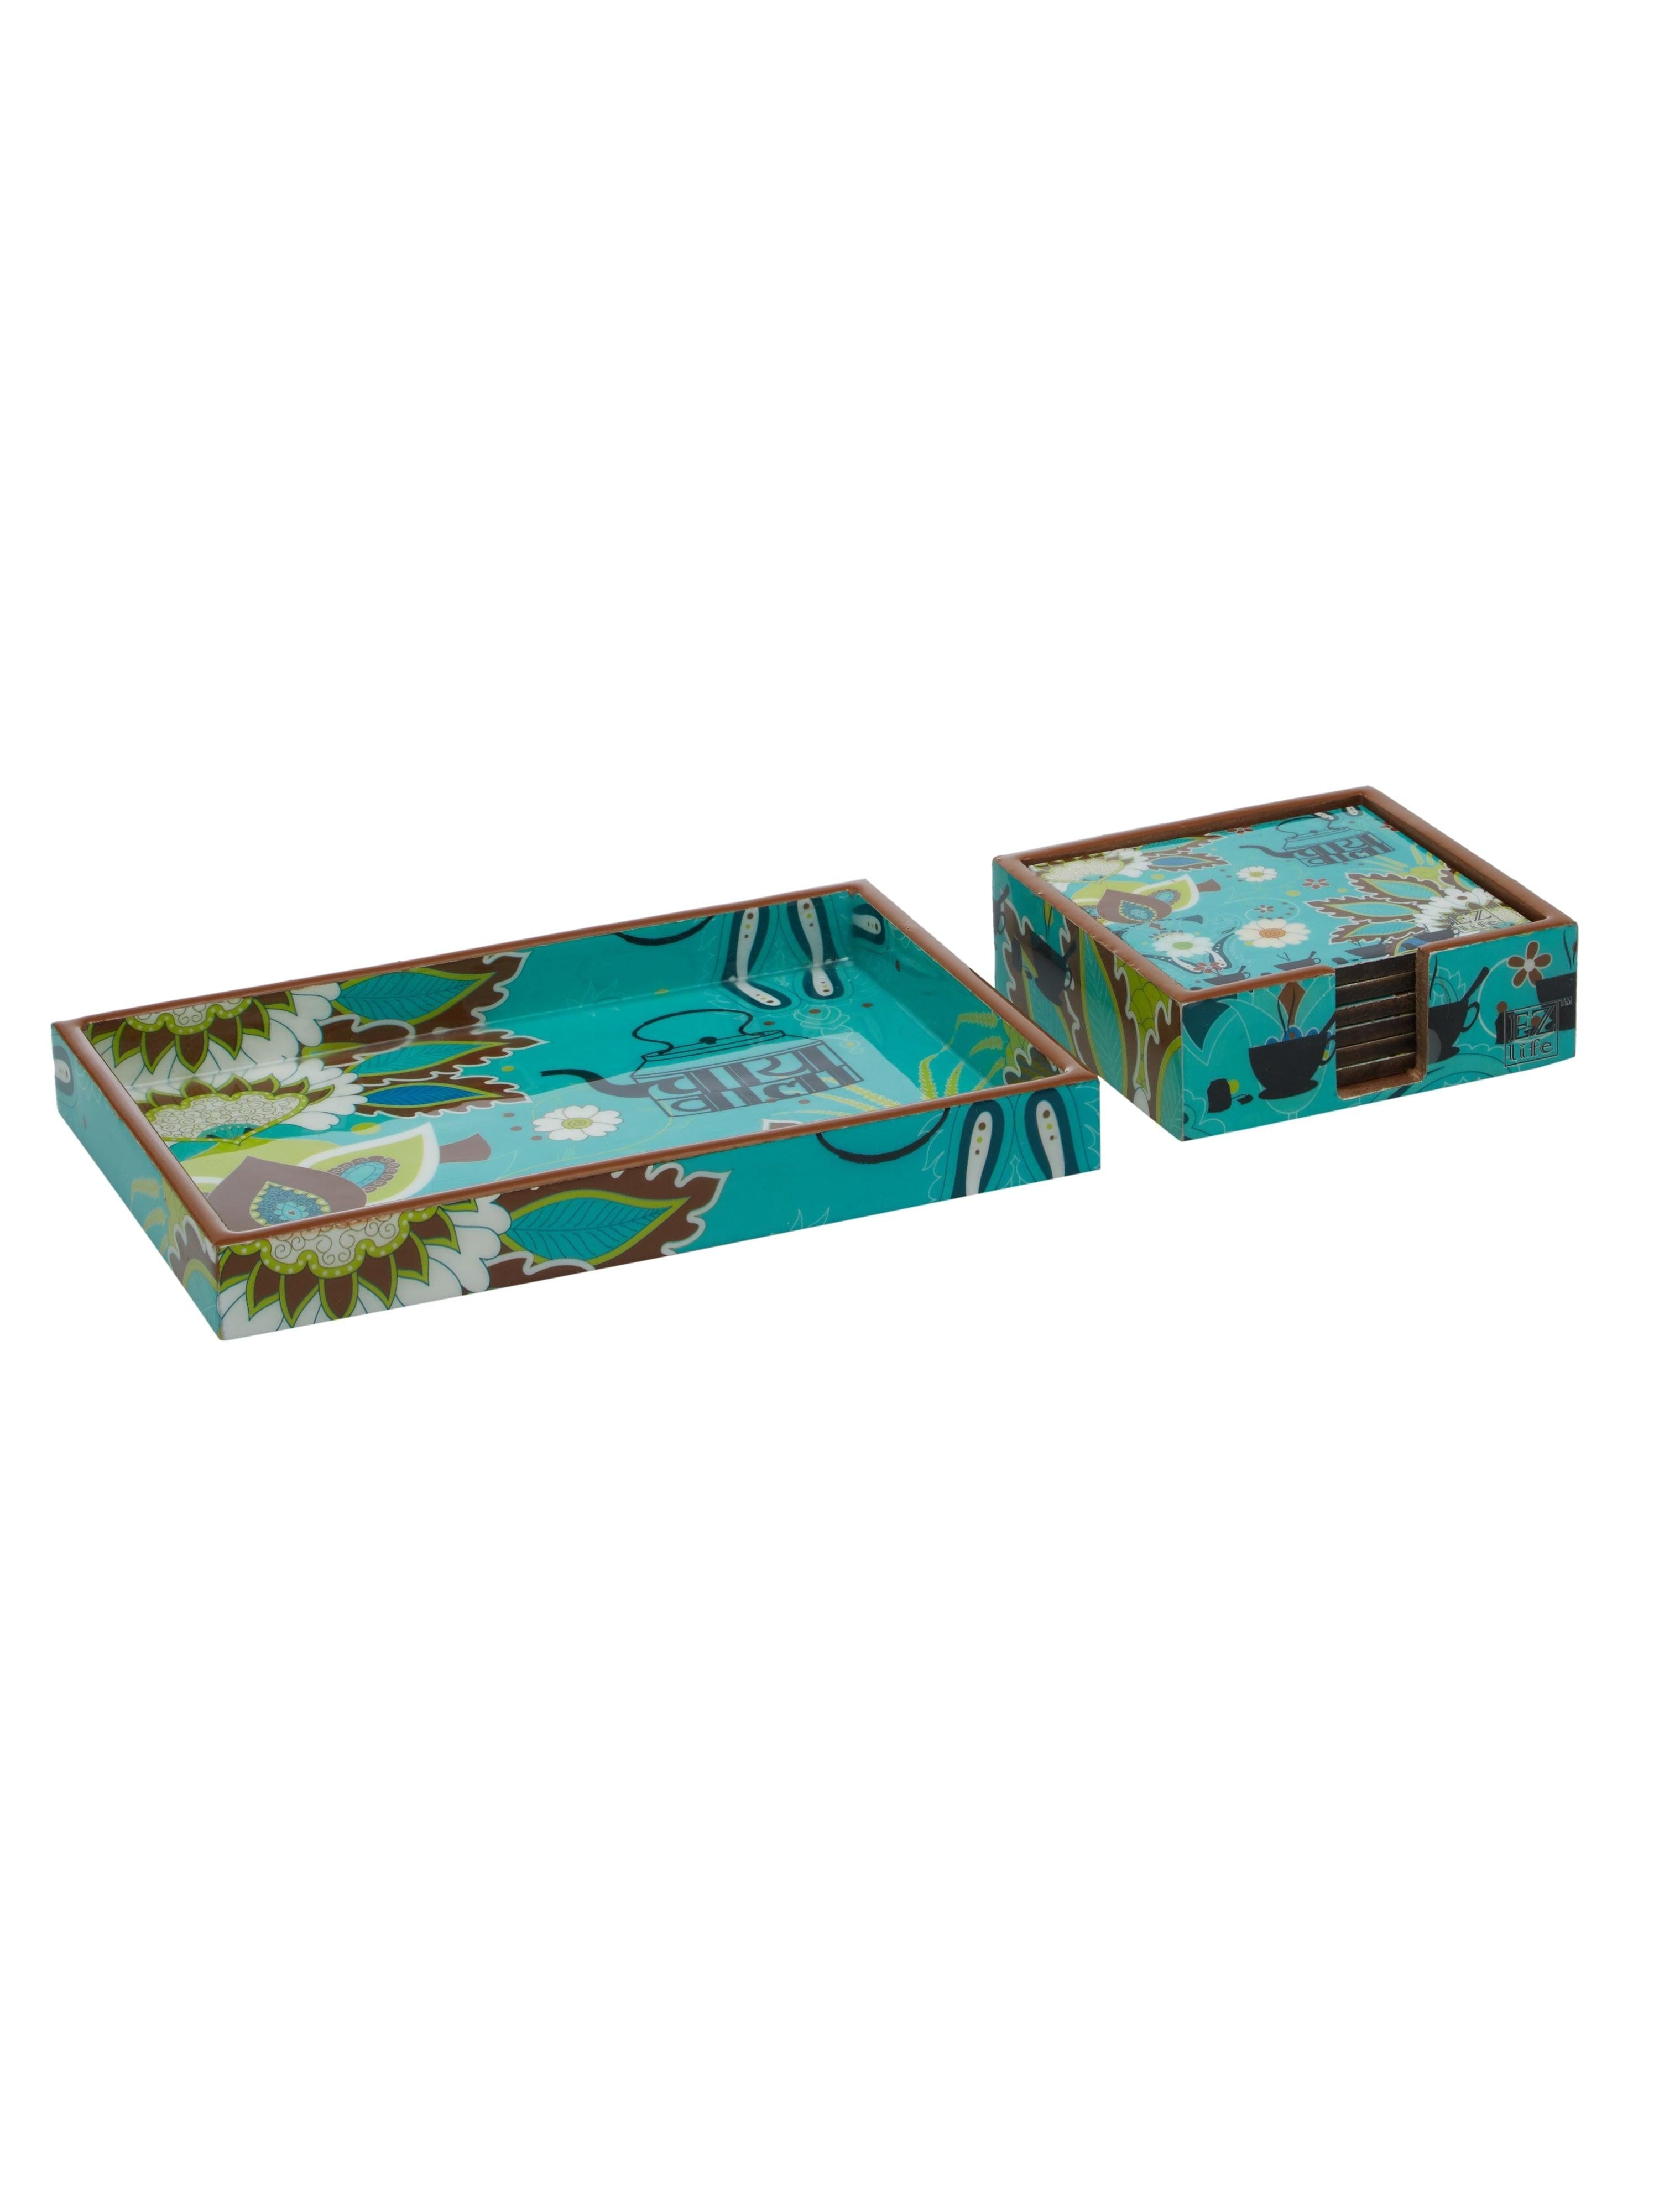 Chaiwala - 9 Inch Wooden Tray & 6 Wooden Coasters with Holder Set (Blue)